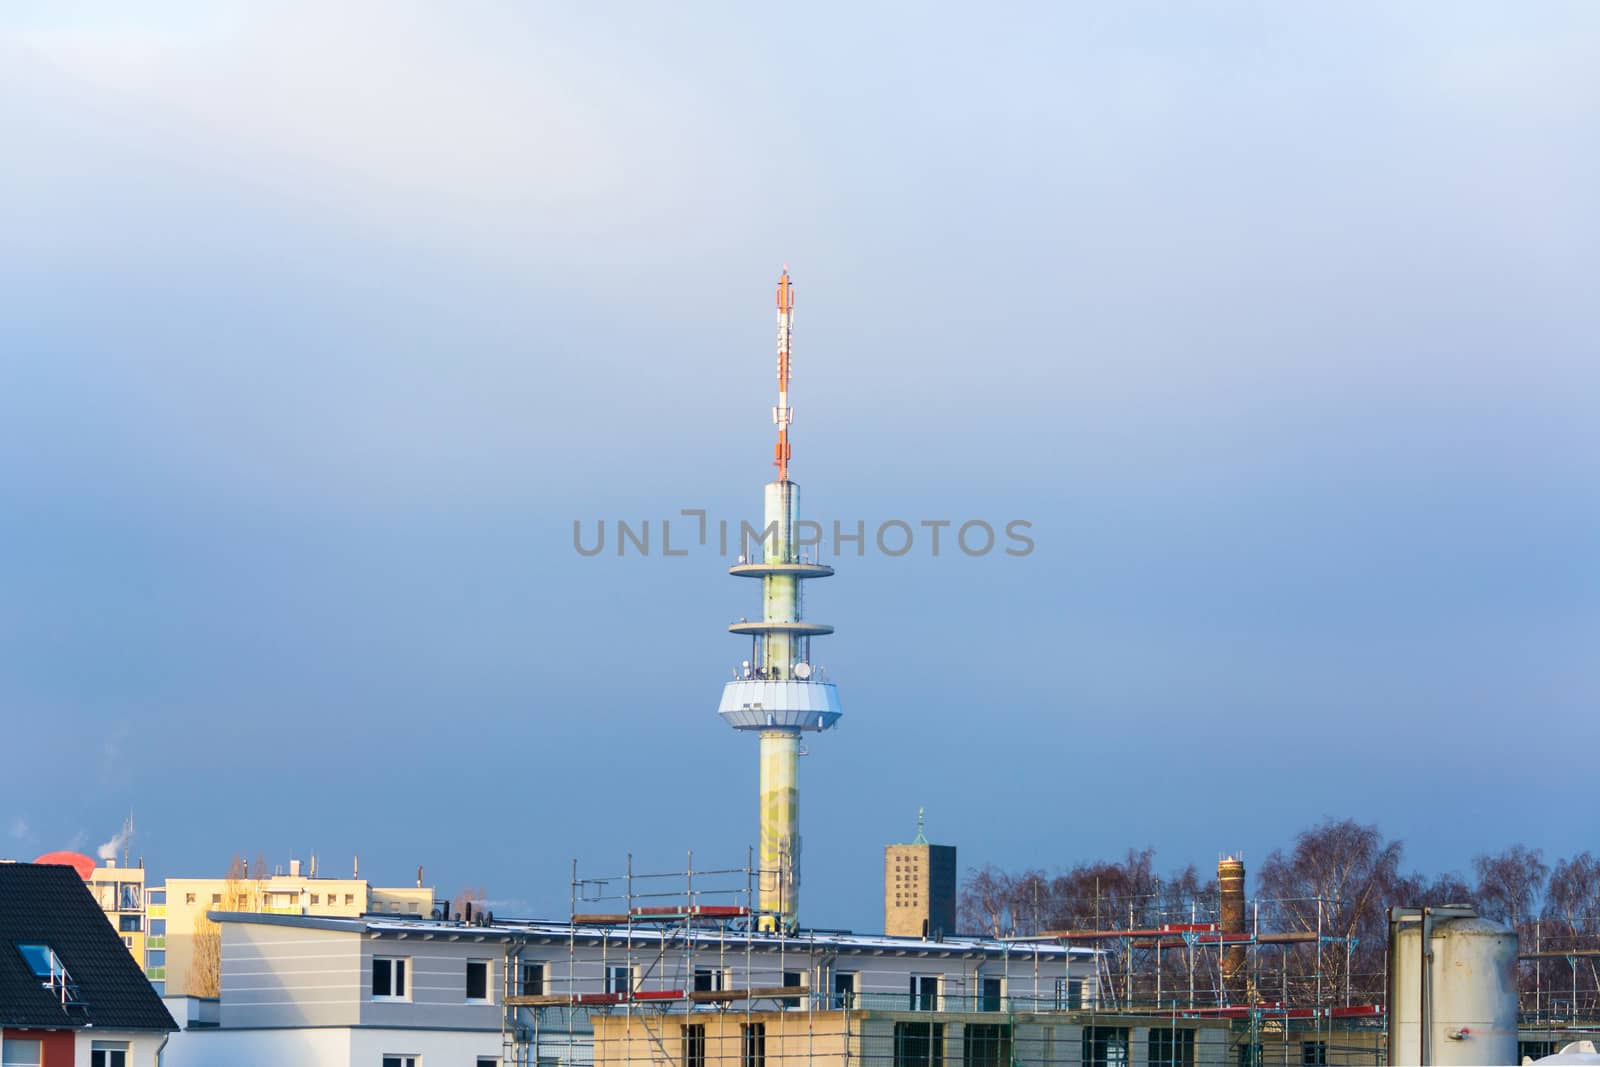 Velberter telecommunications tower also called Telebert.
Under the radio tower is the primary center of Telekom.